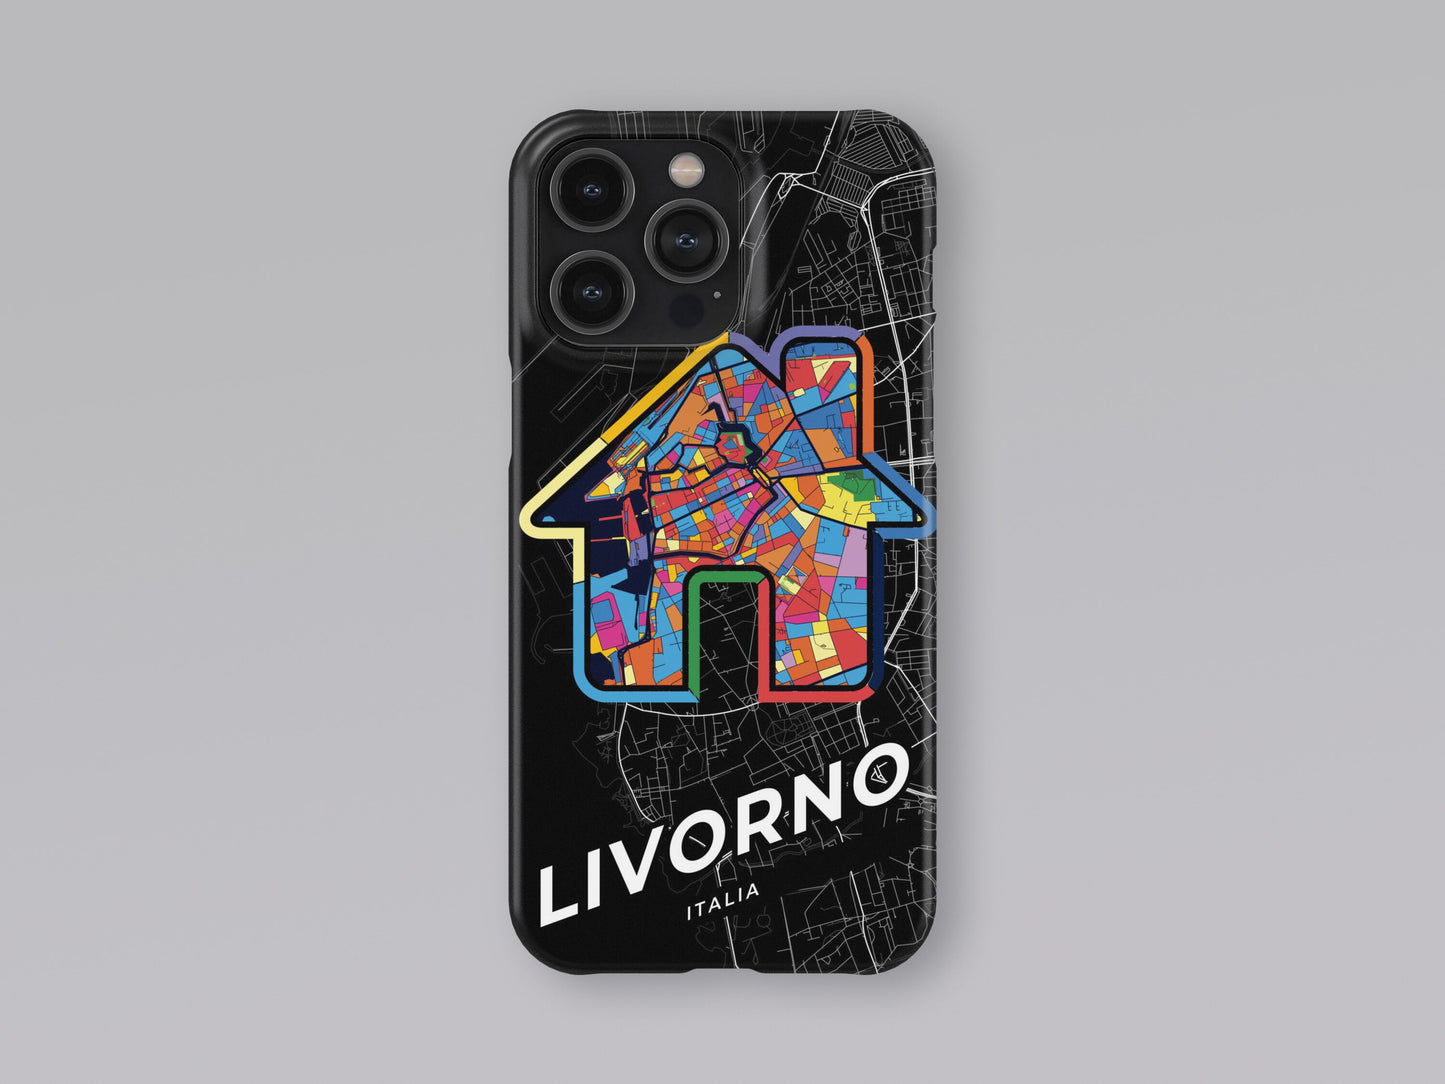 Livorno Italy slim phone case with colorful icon. Birthday, wedding or housewarming gift. Couple match cases. 3